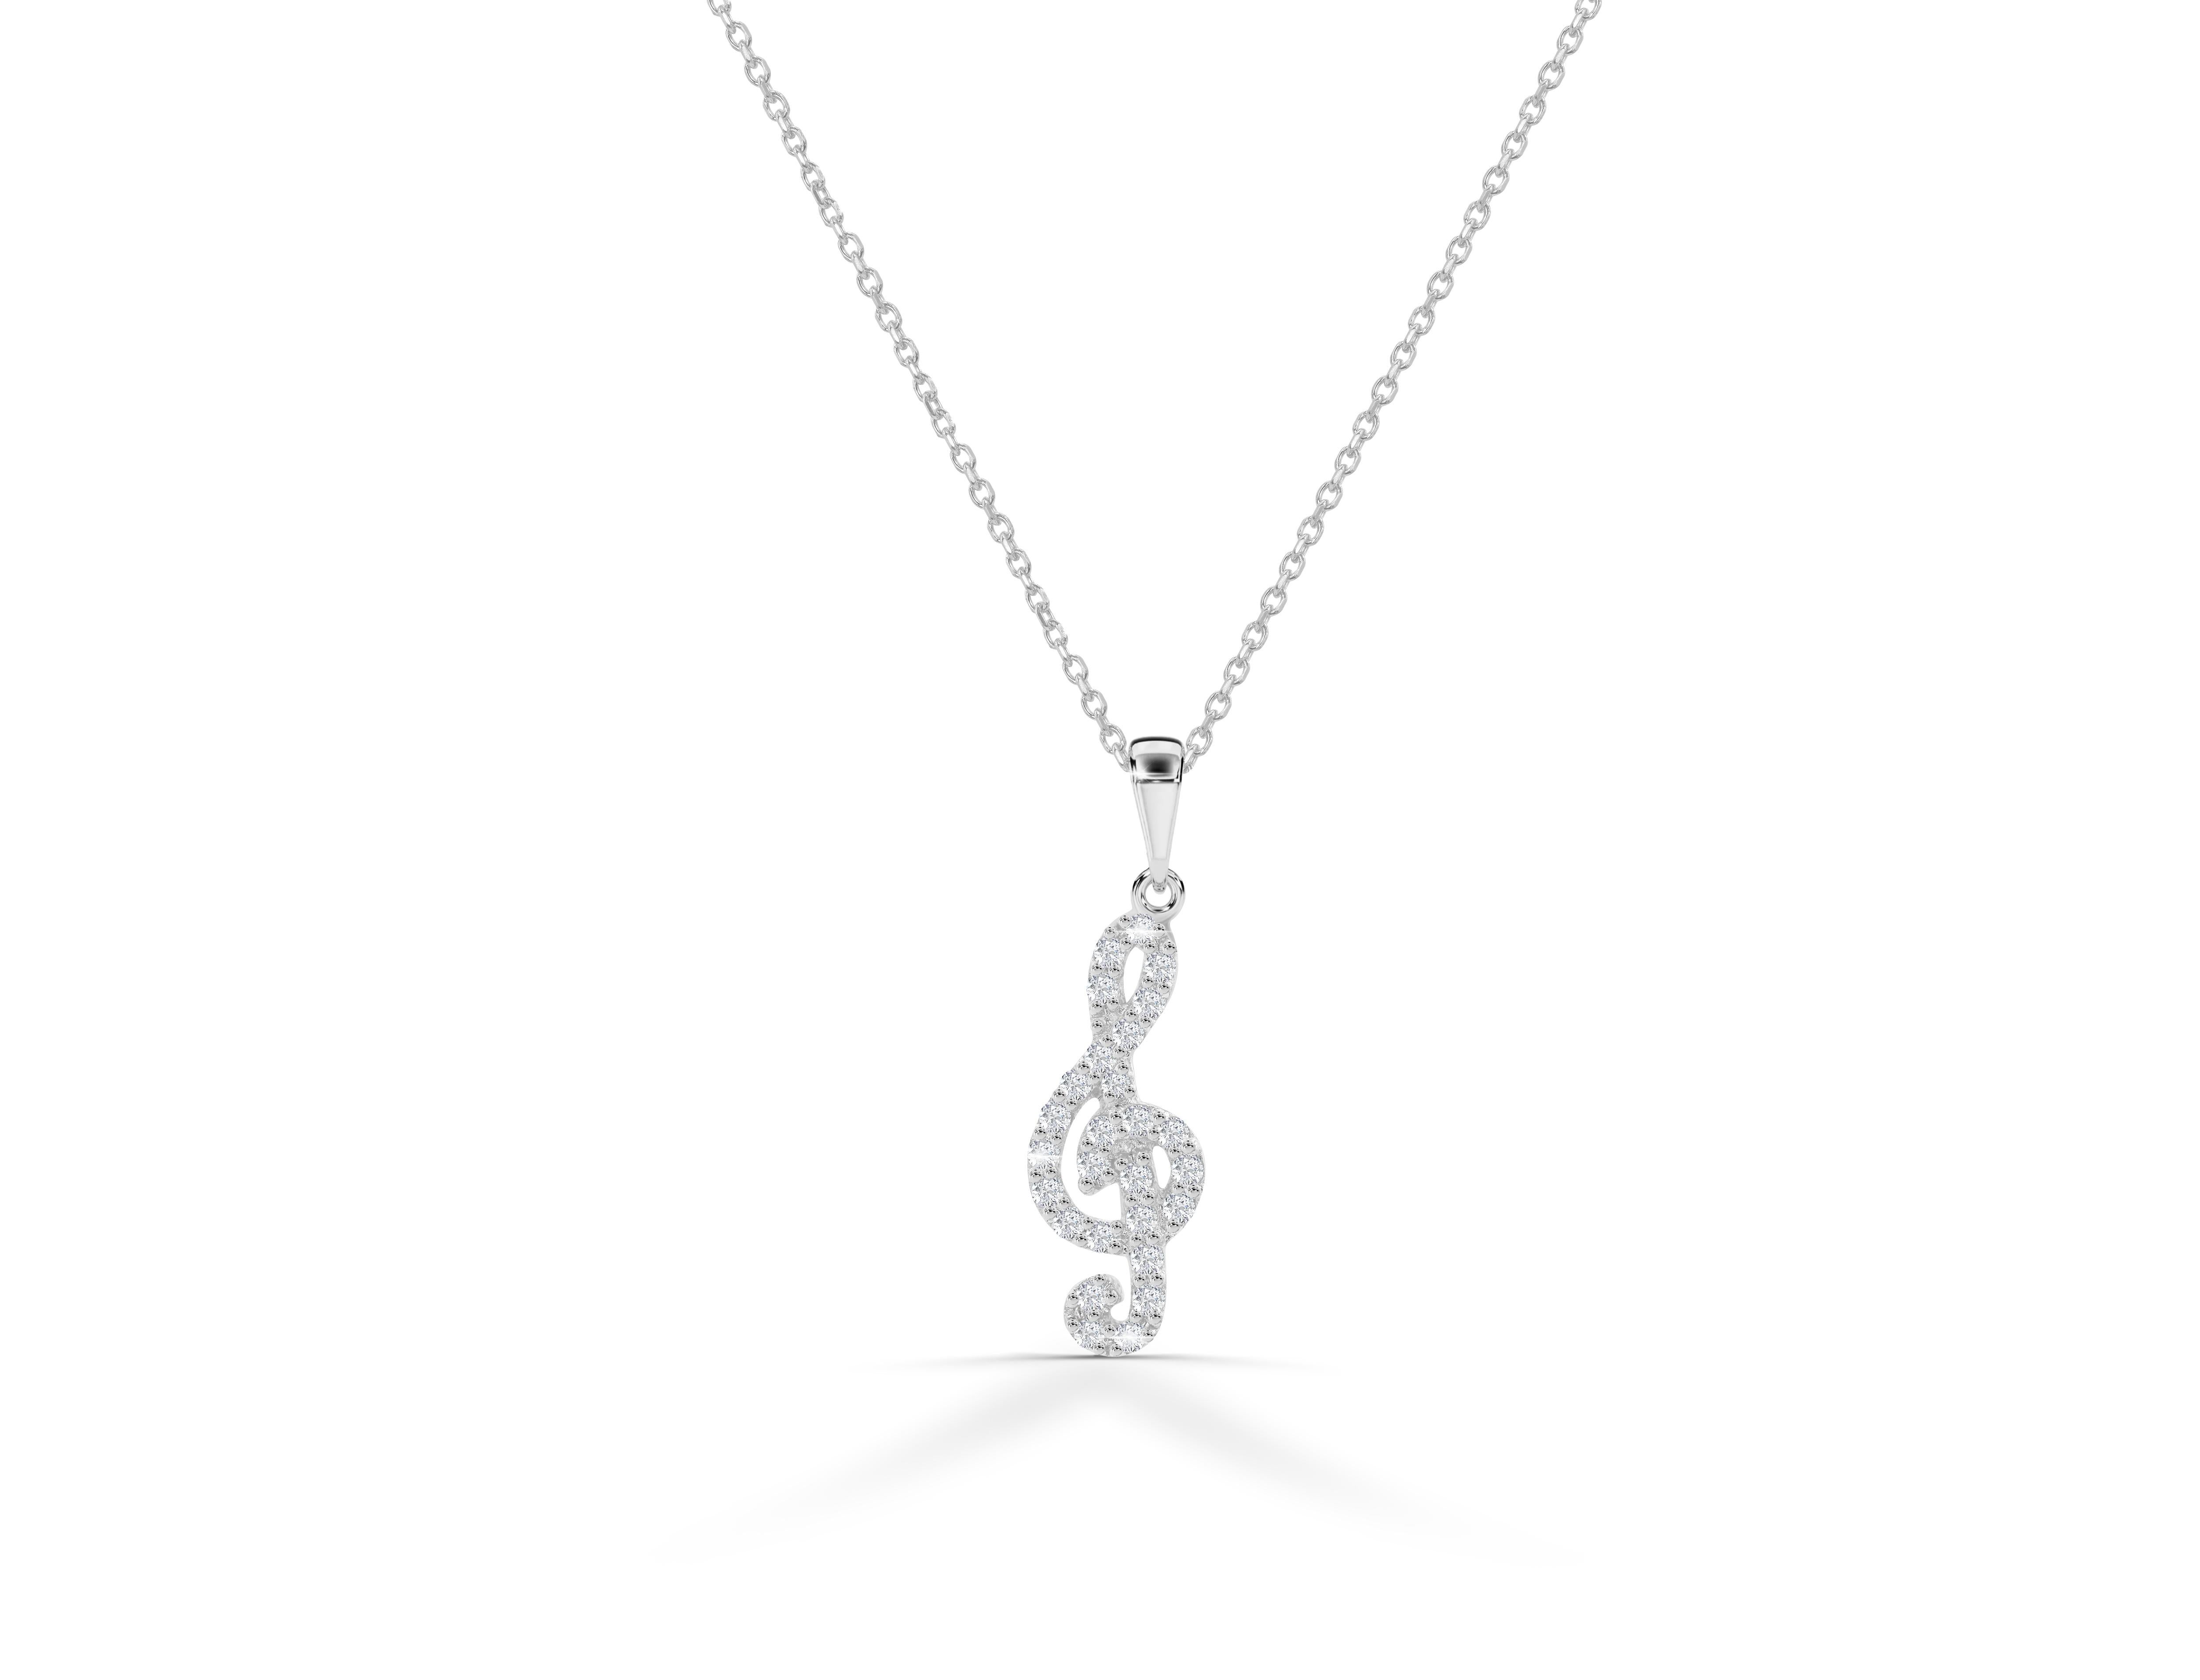 is golden clef jewelry good quality